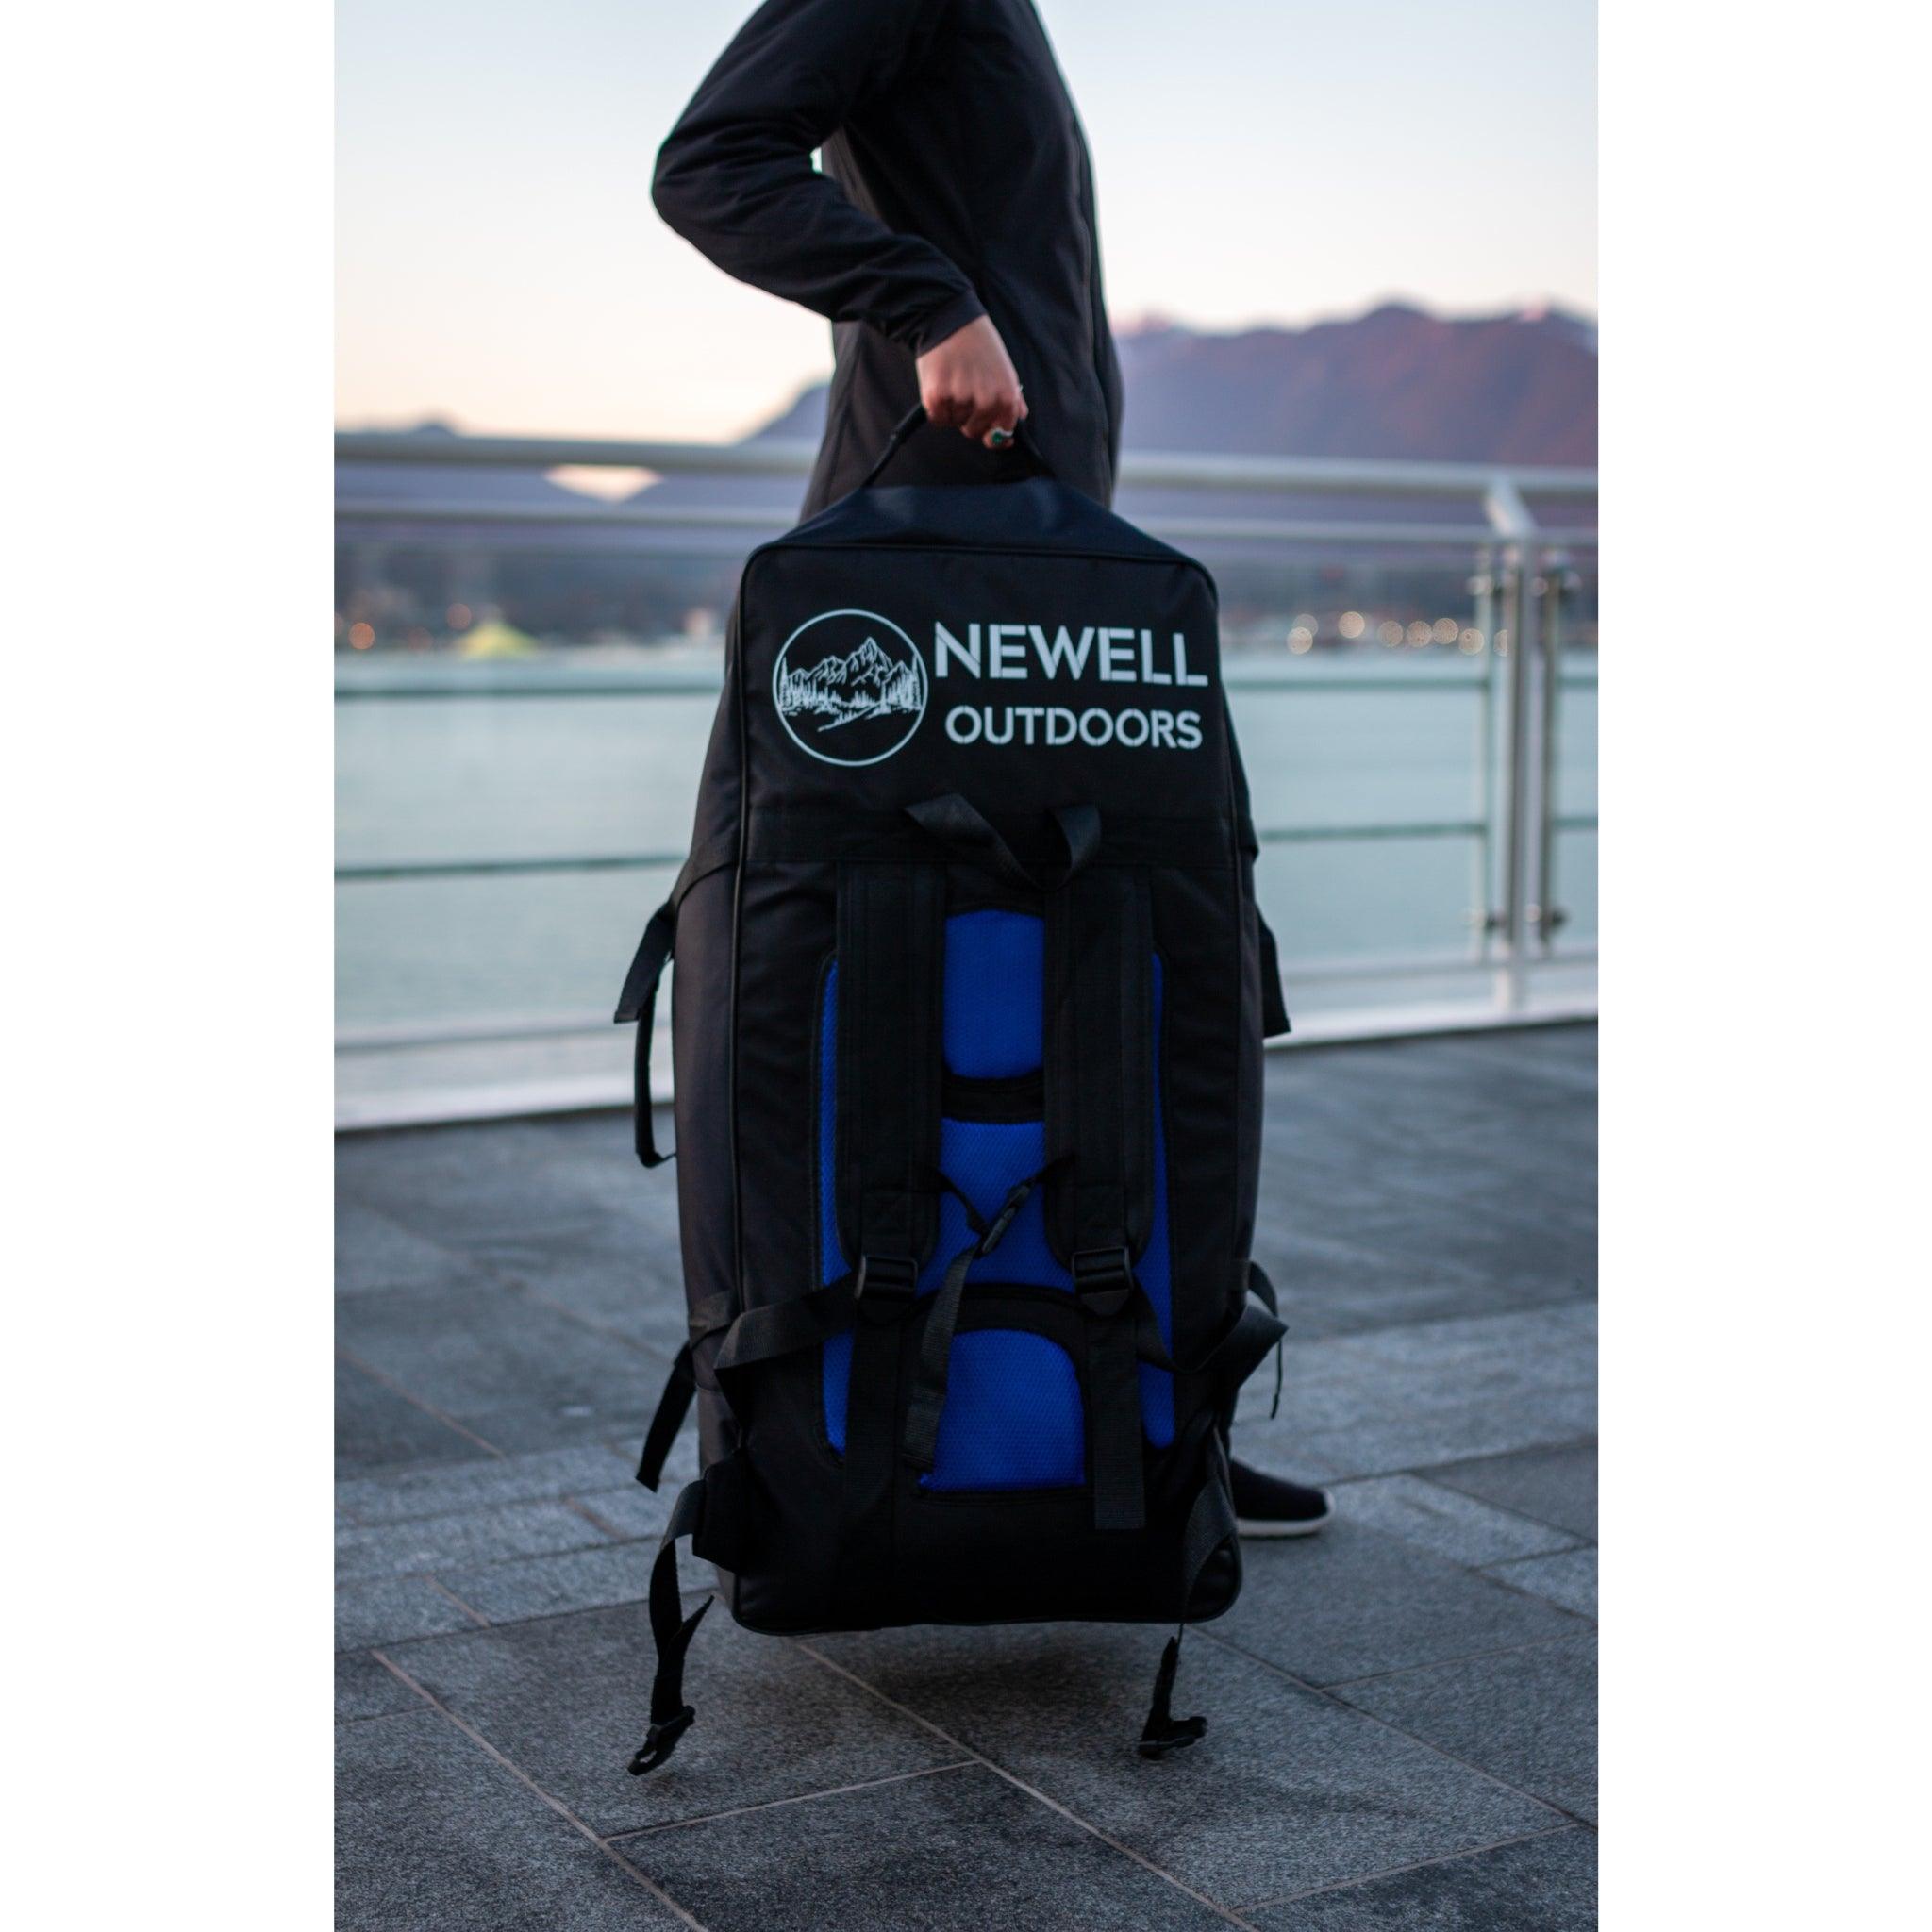 The Herb paddleboard bag Newell Outdoors.